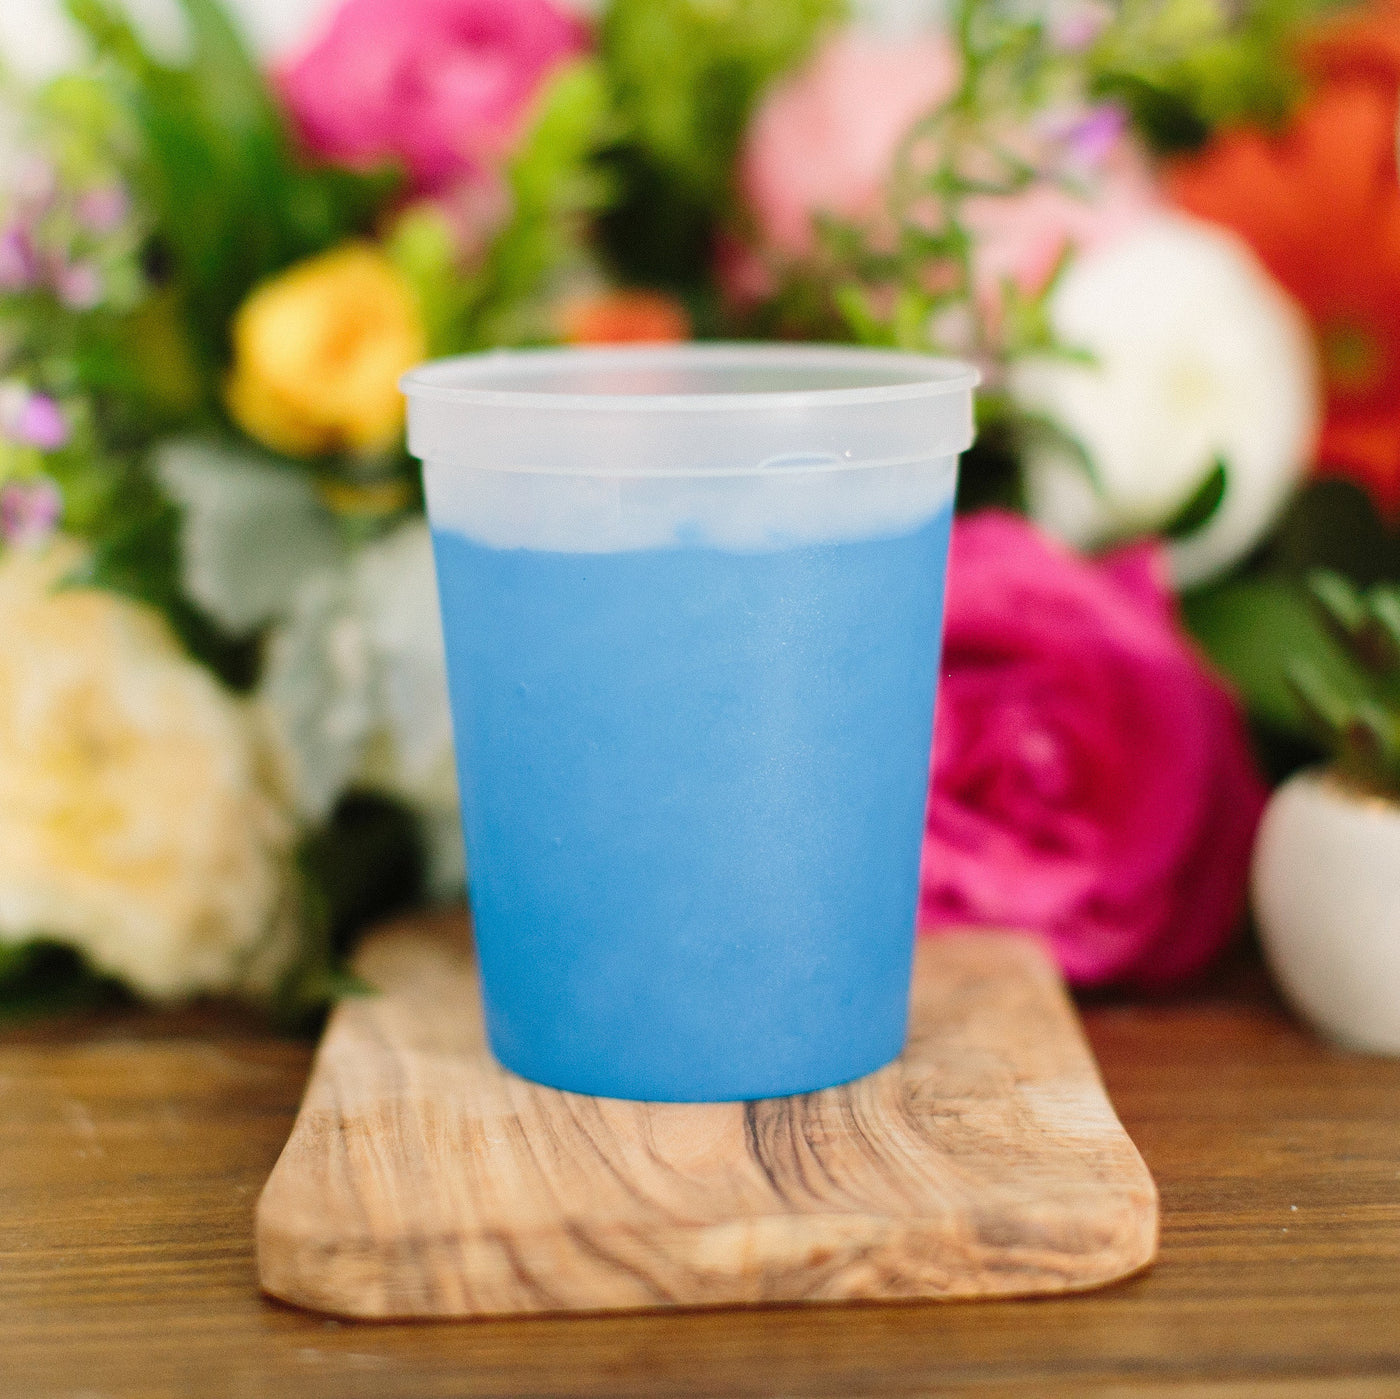 Happily Ever After Wedding Color Changing Cups #1814